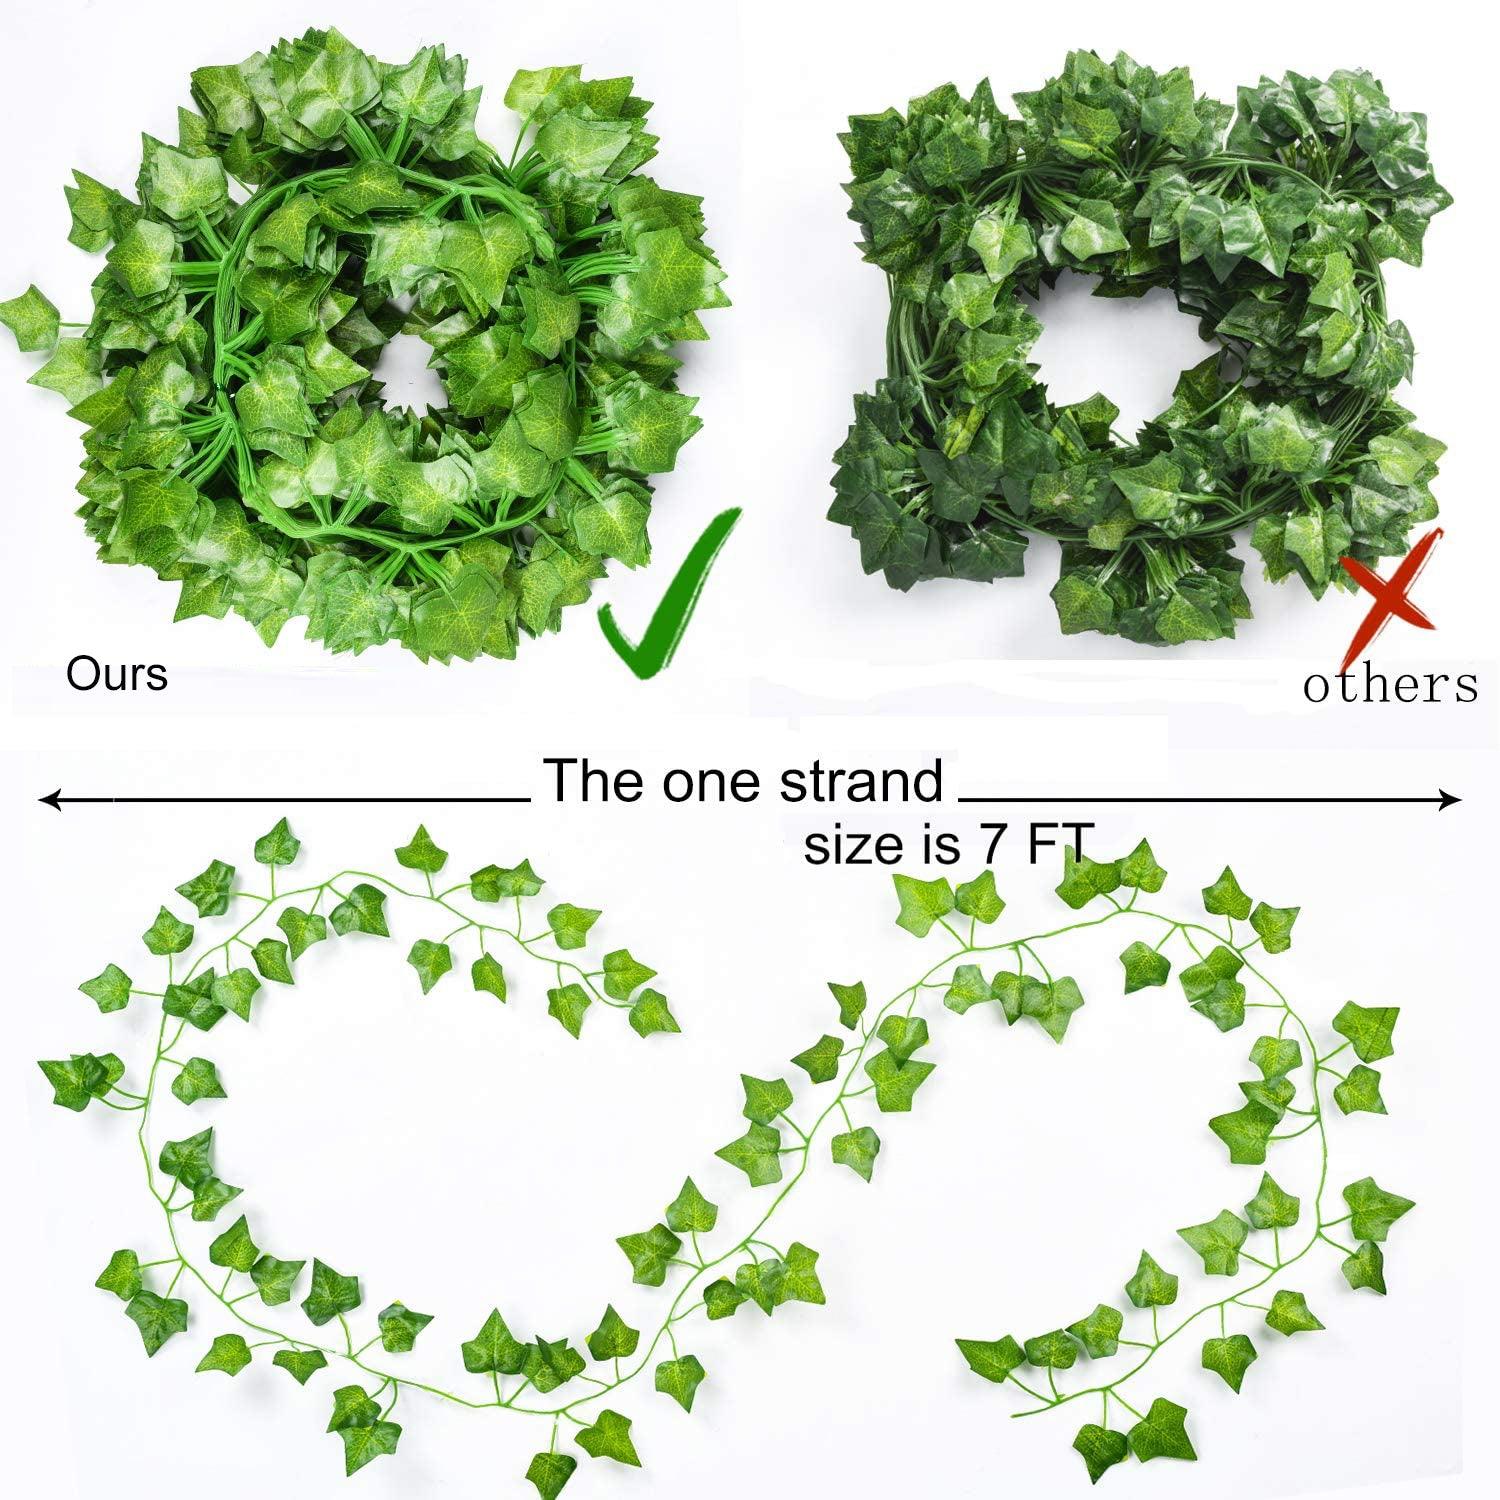 12 Strands Artificial Ivy Leaf Plants Vine Hanging Garland Fake Foliage Flowers Home Kitchen Garden Office Wedding Wall Decor, 84 Feet, Green - If you say i do